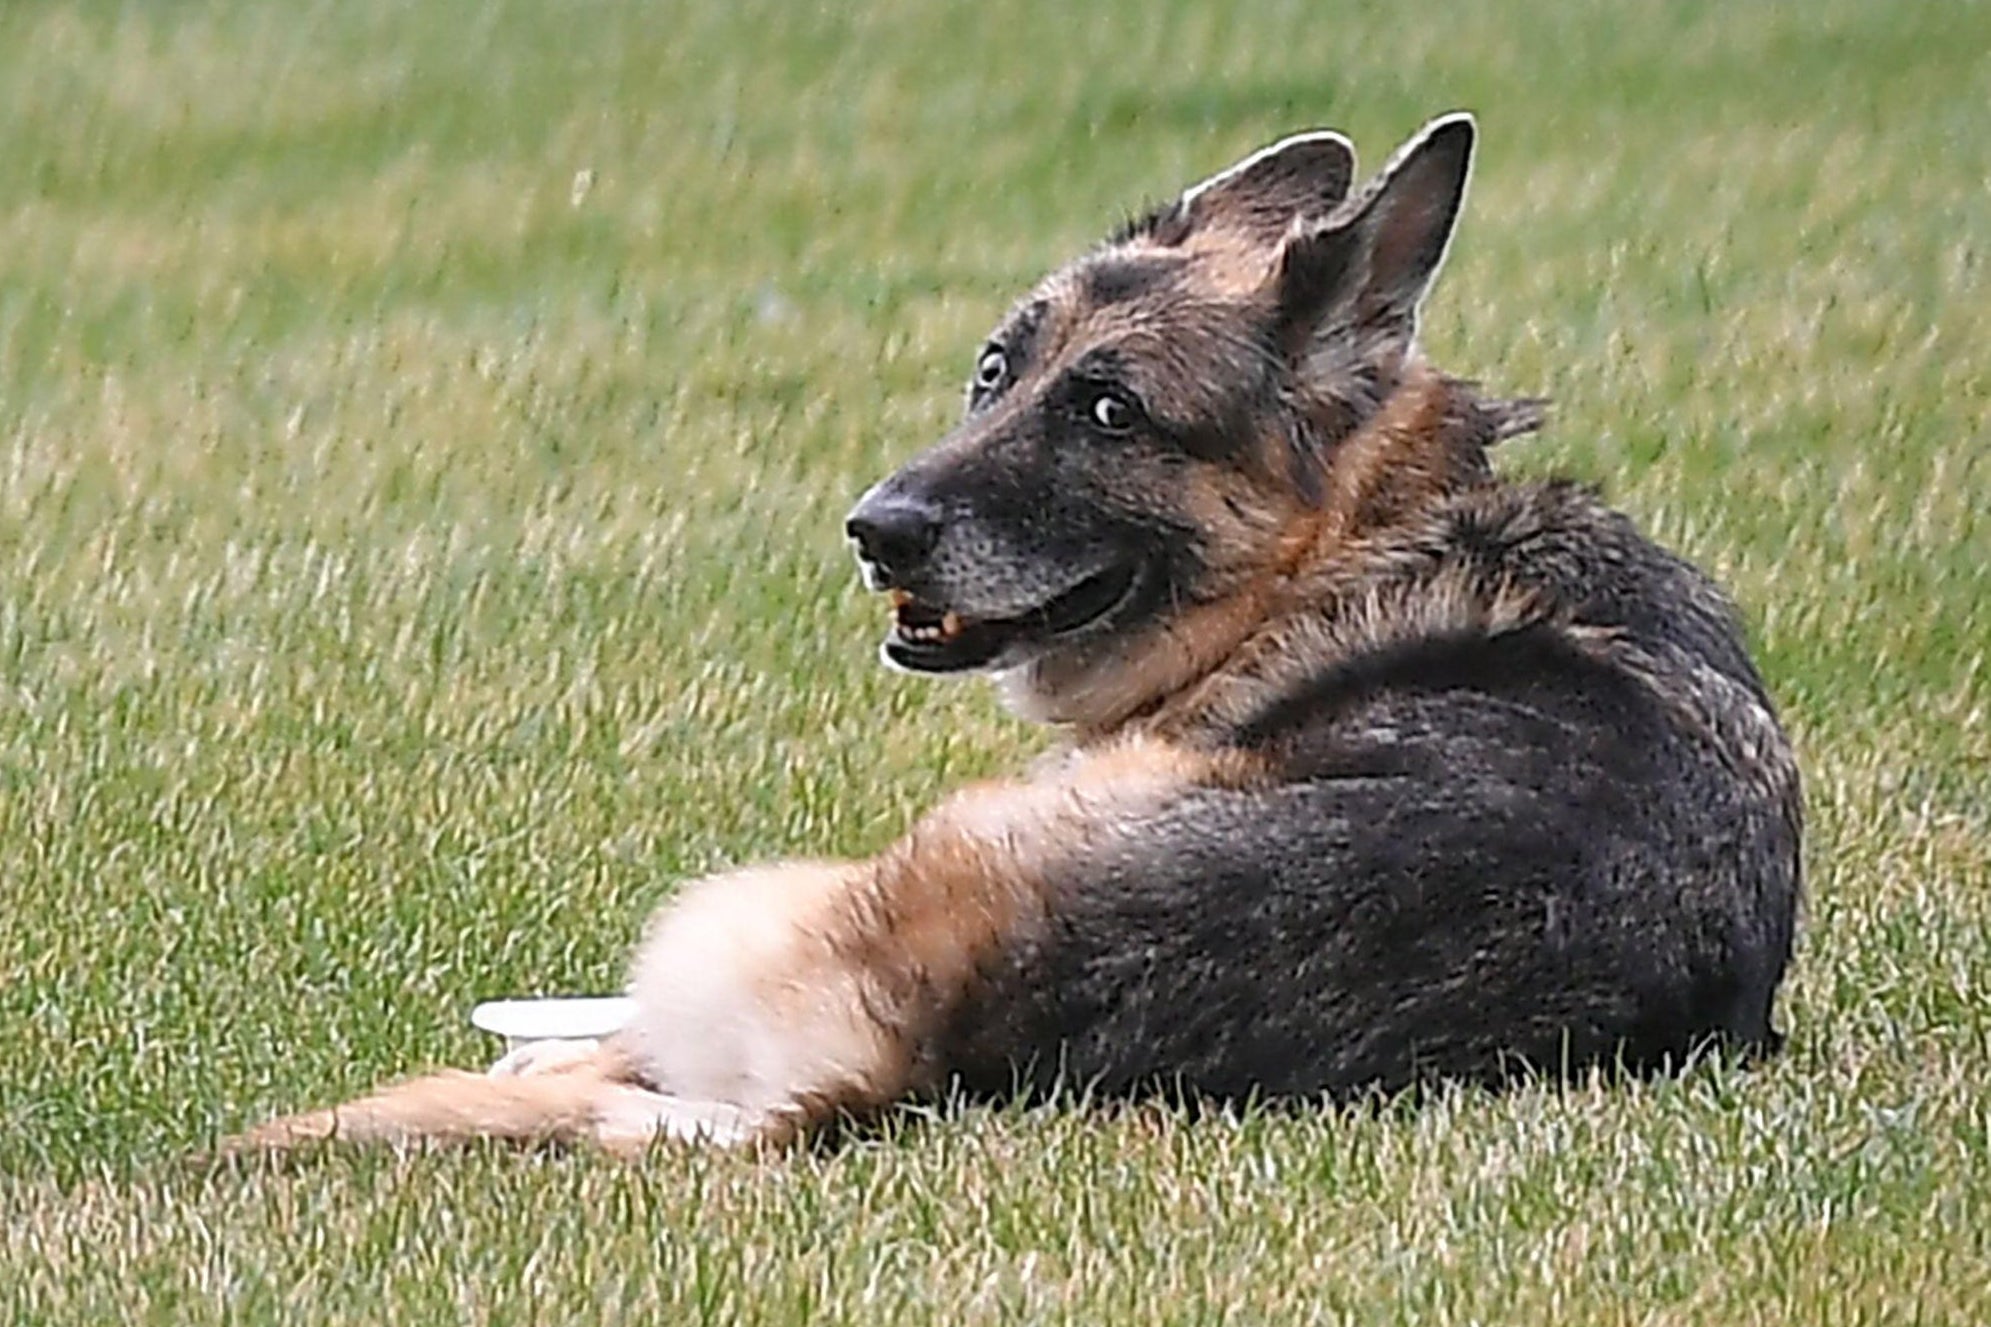 The Bidens dogs Champ is seen on the South Lawn of the White House in Washington, D.C. on March 31, 2021. 